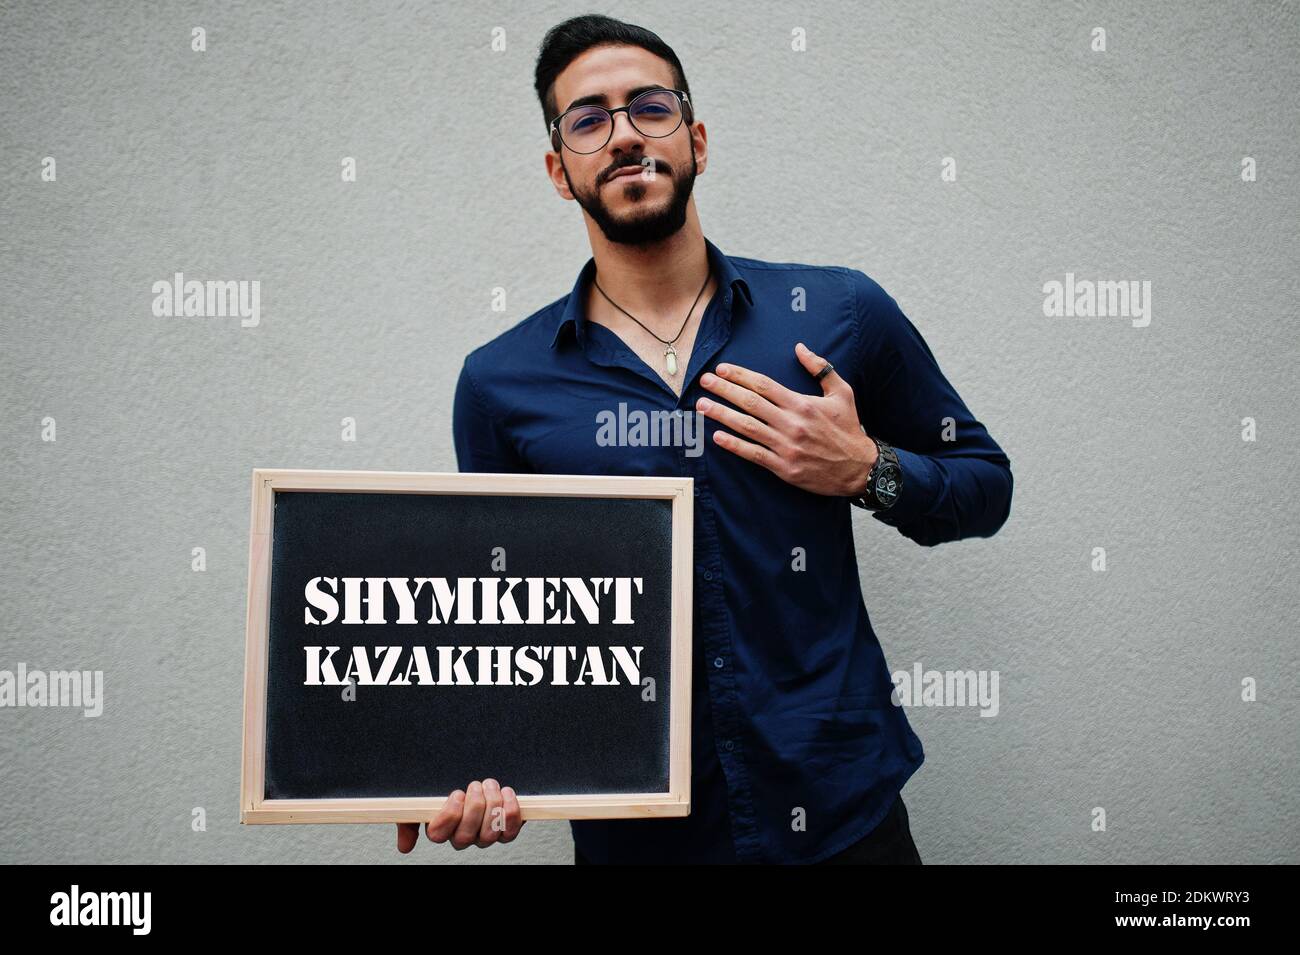 Arab man wear blue shirt and eyeglasses hold board with Shymkent Kazakhstan inscription. Largest cities in islamic world concept. Stock Photo